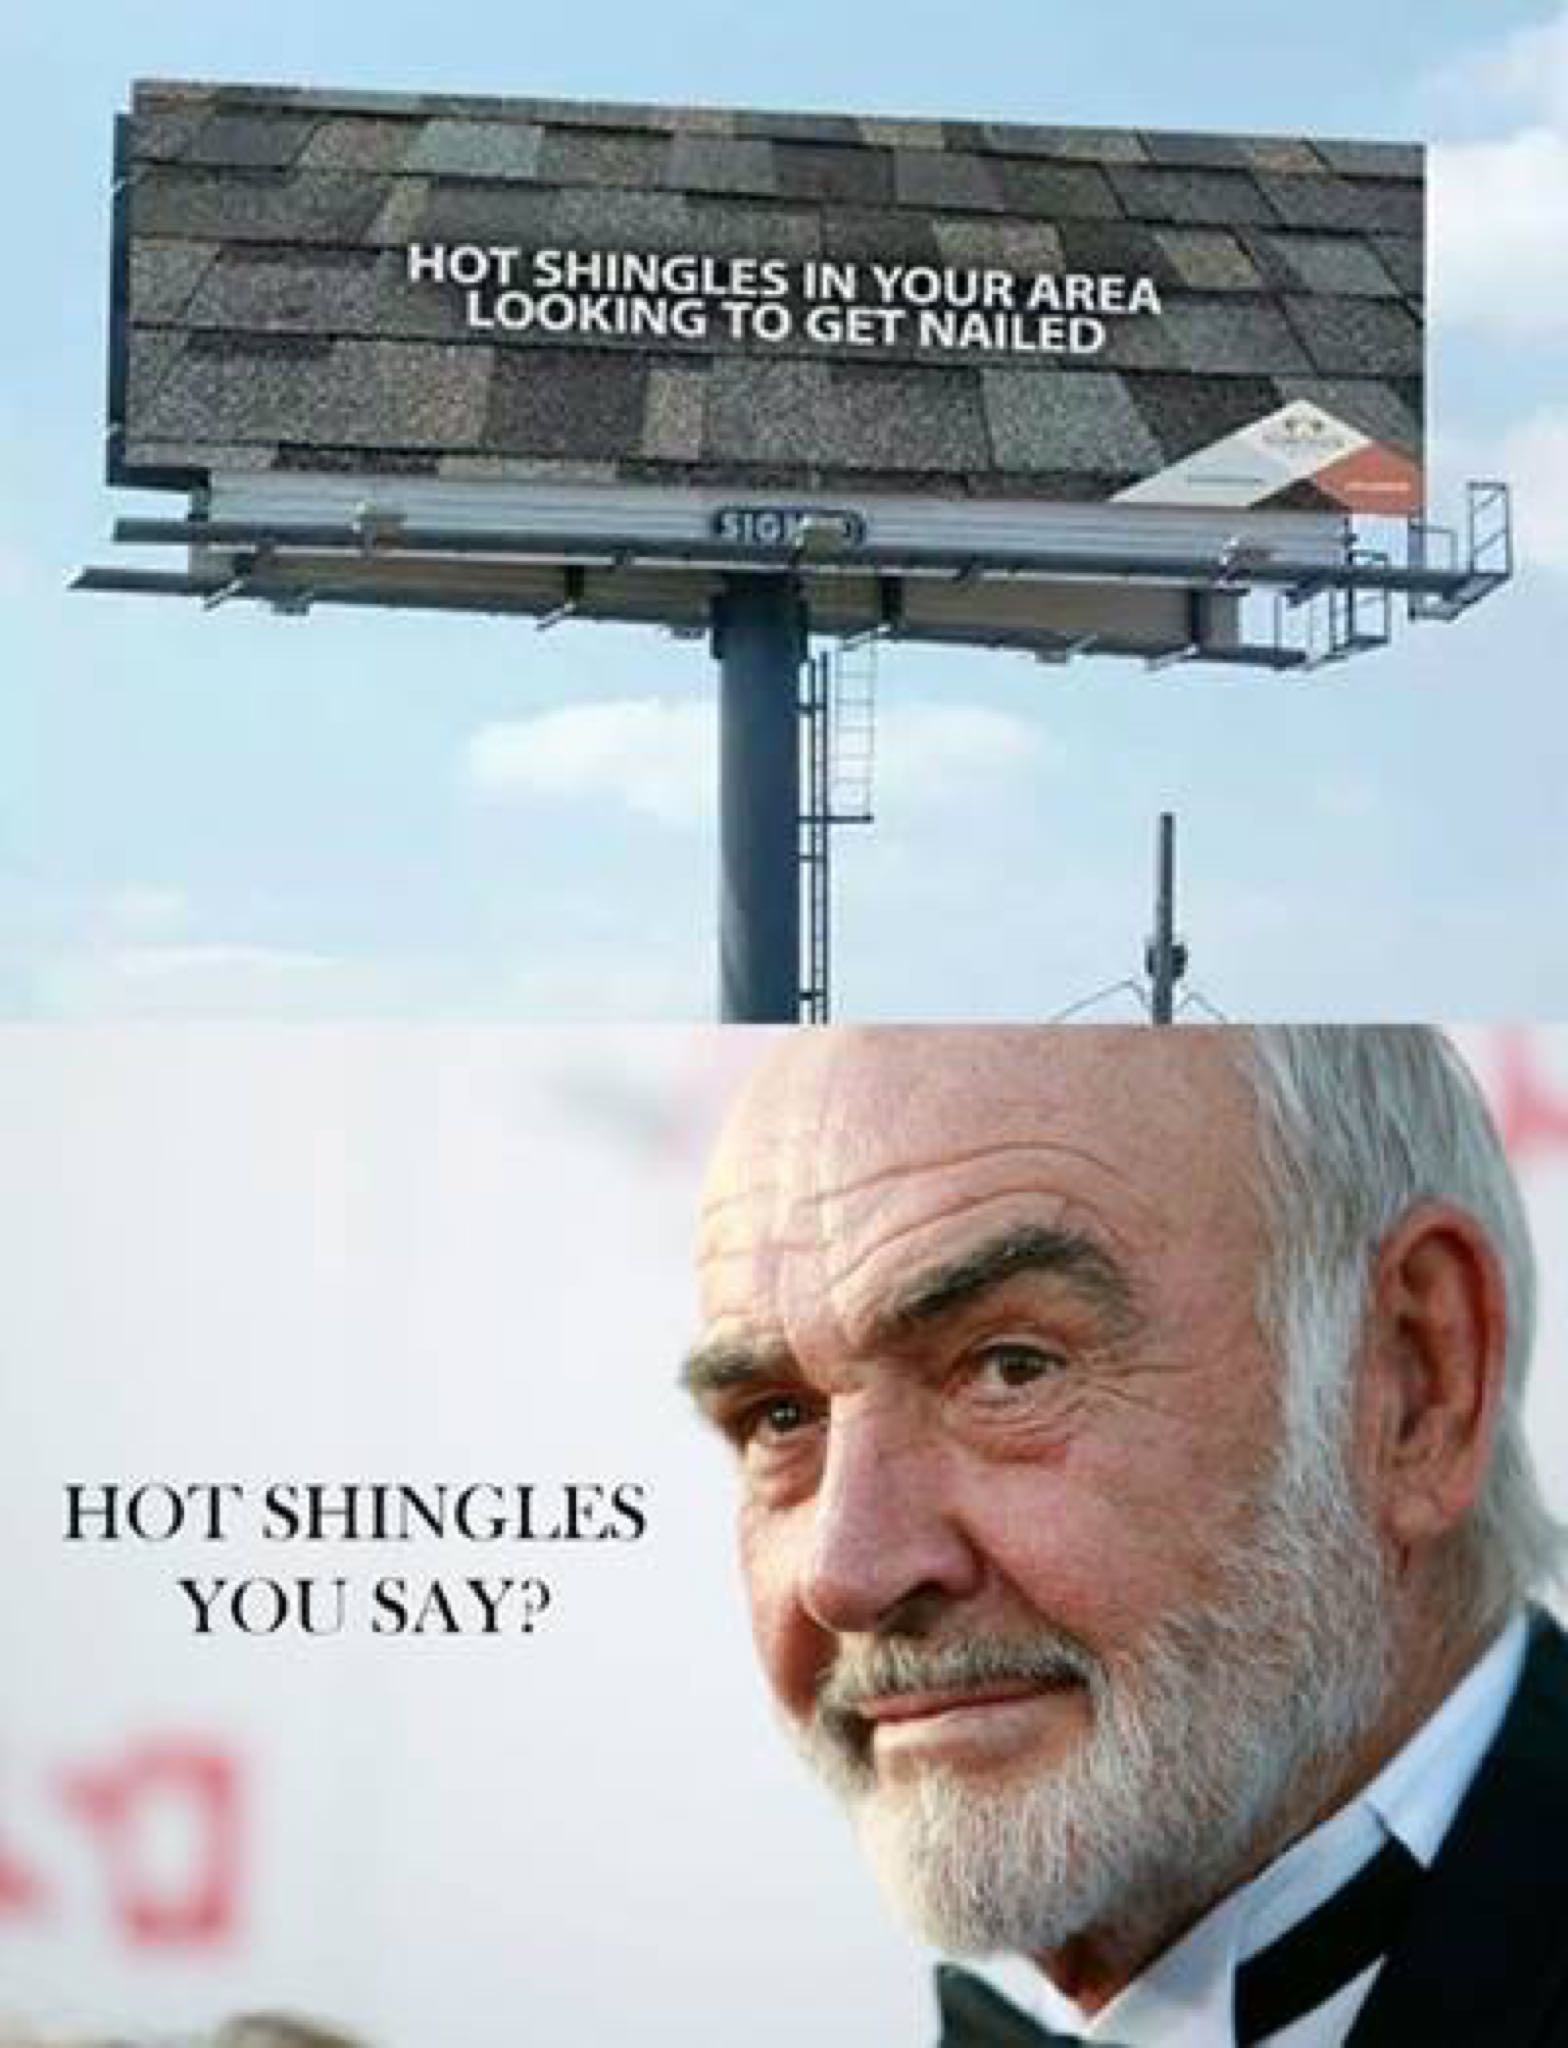 sean connery - Hot Shingles In Your Area Looking To Get Nailed Sg Hot Shingles You Say?